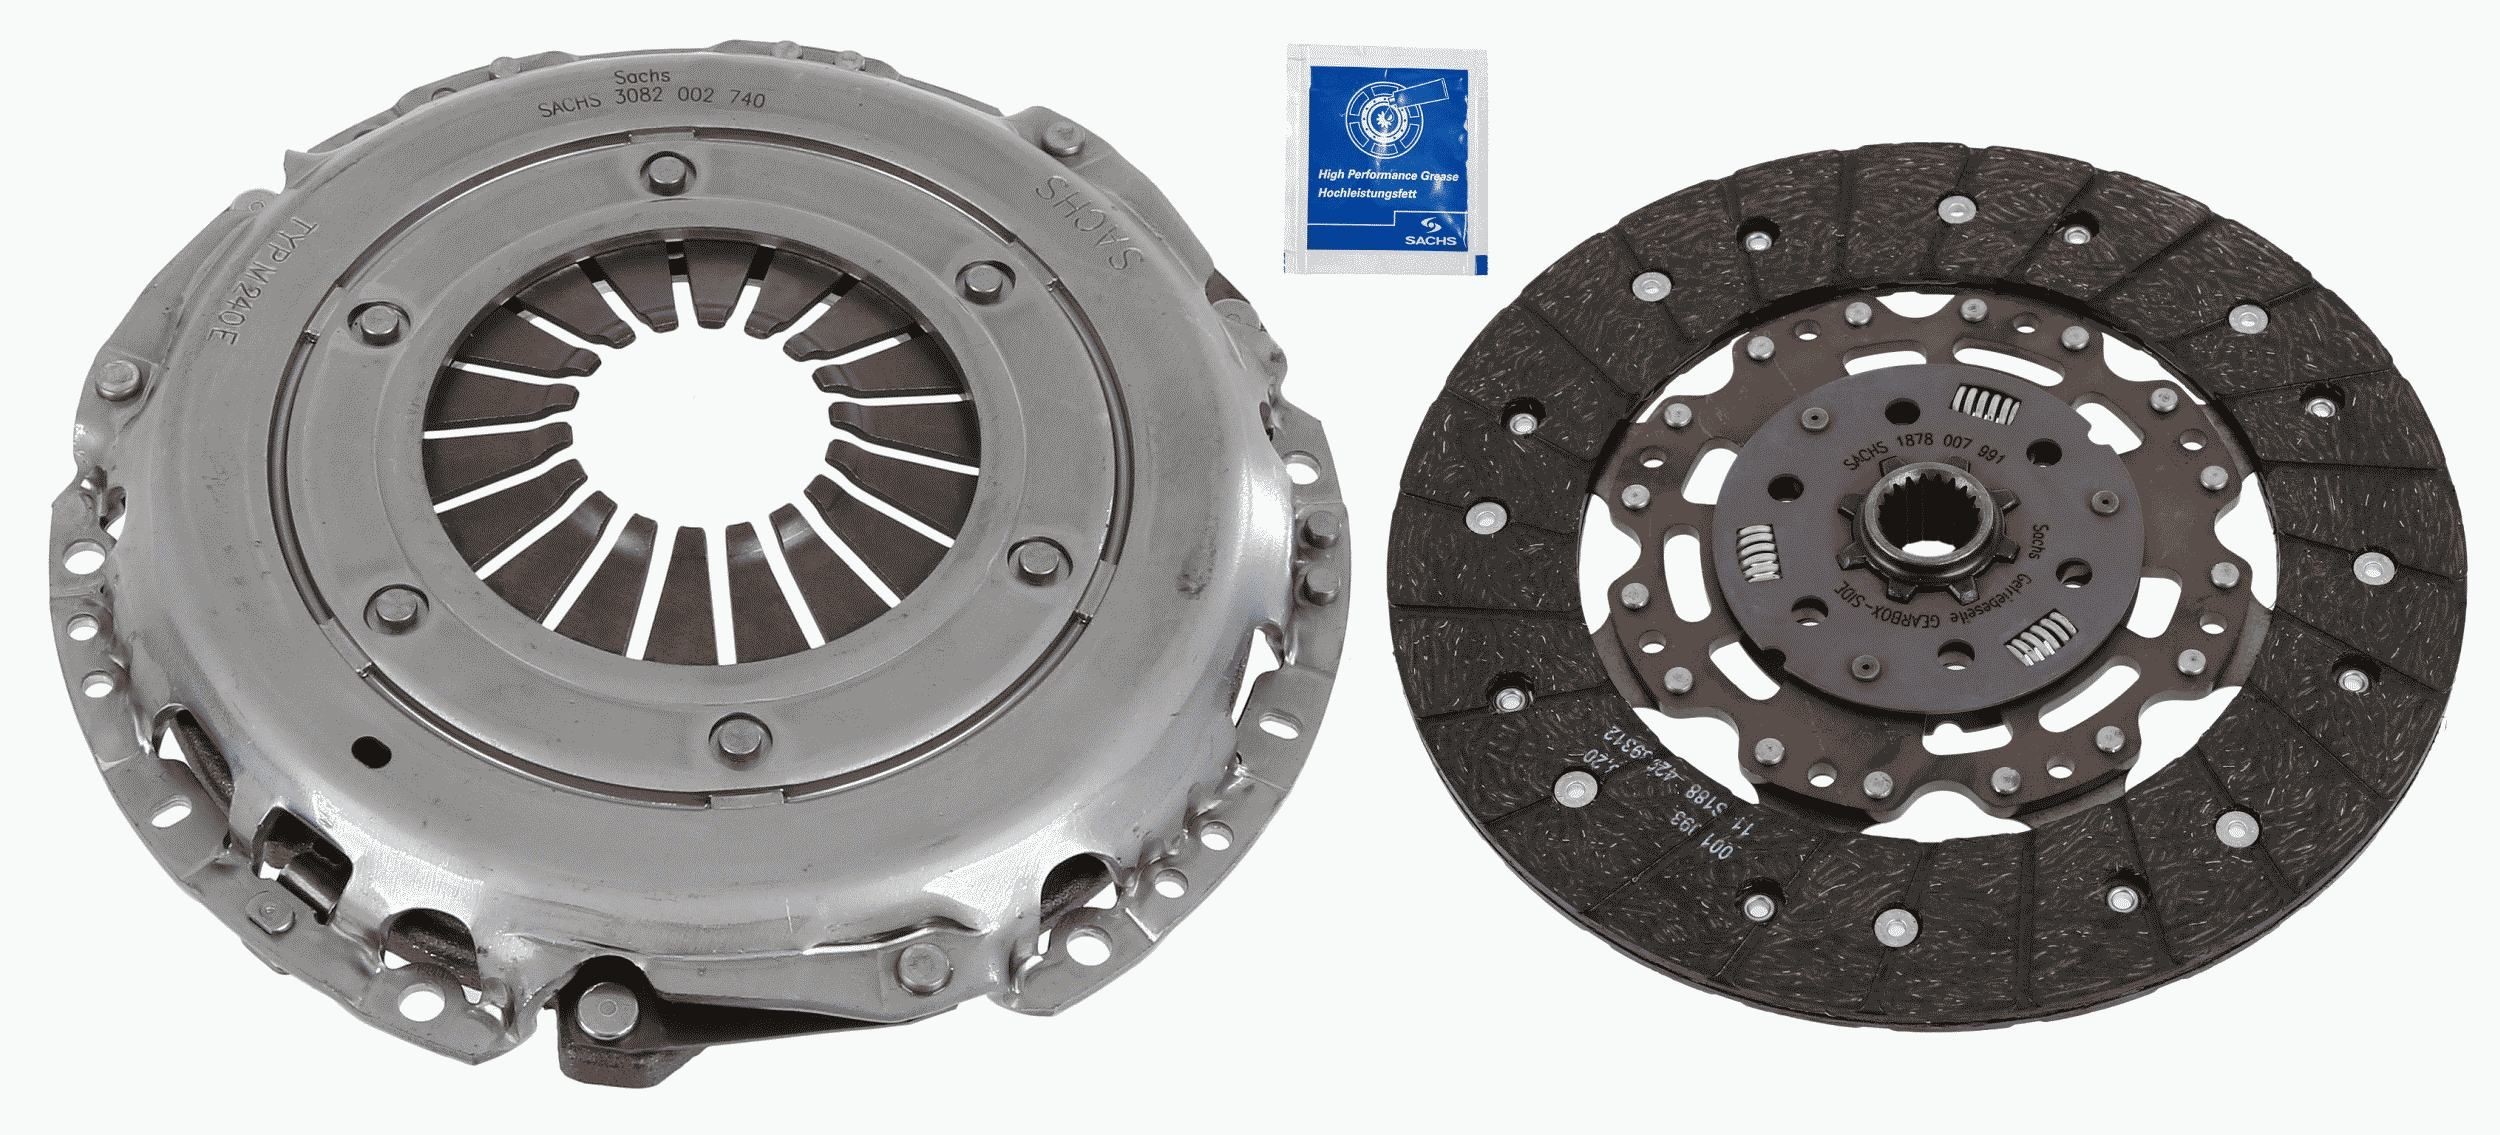 SACHS 3000 970 145 Clutch kit CHEVROLET experience and price